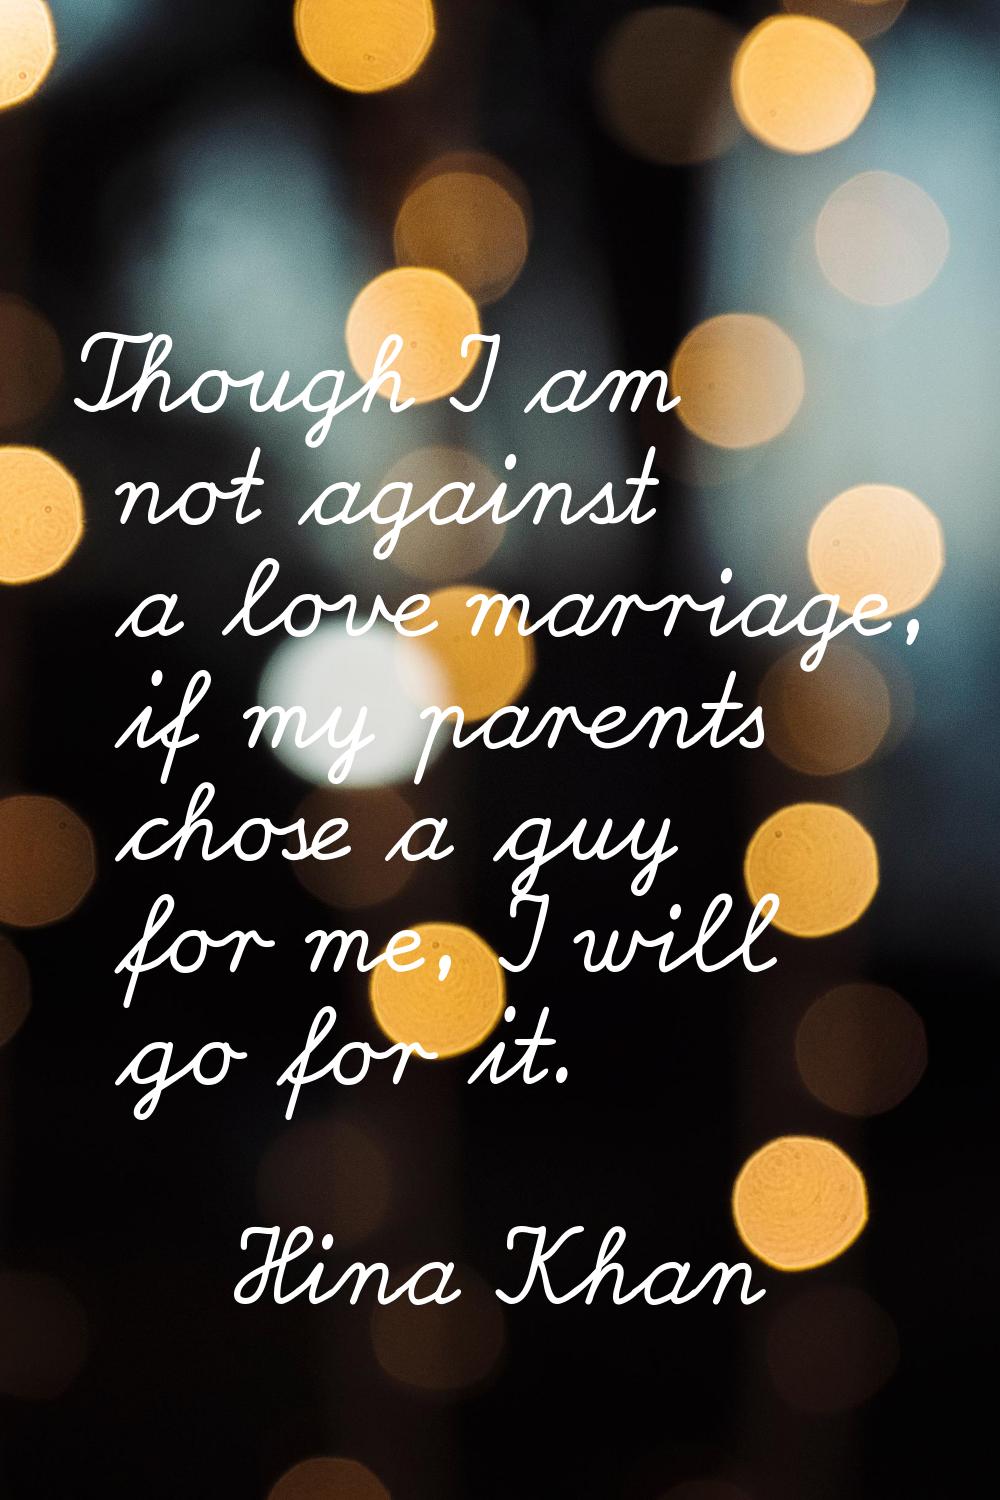 Though I am not against a love marriage, if my parents chose a guy for me, I will go for it.